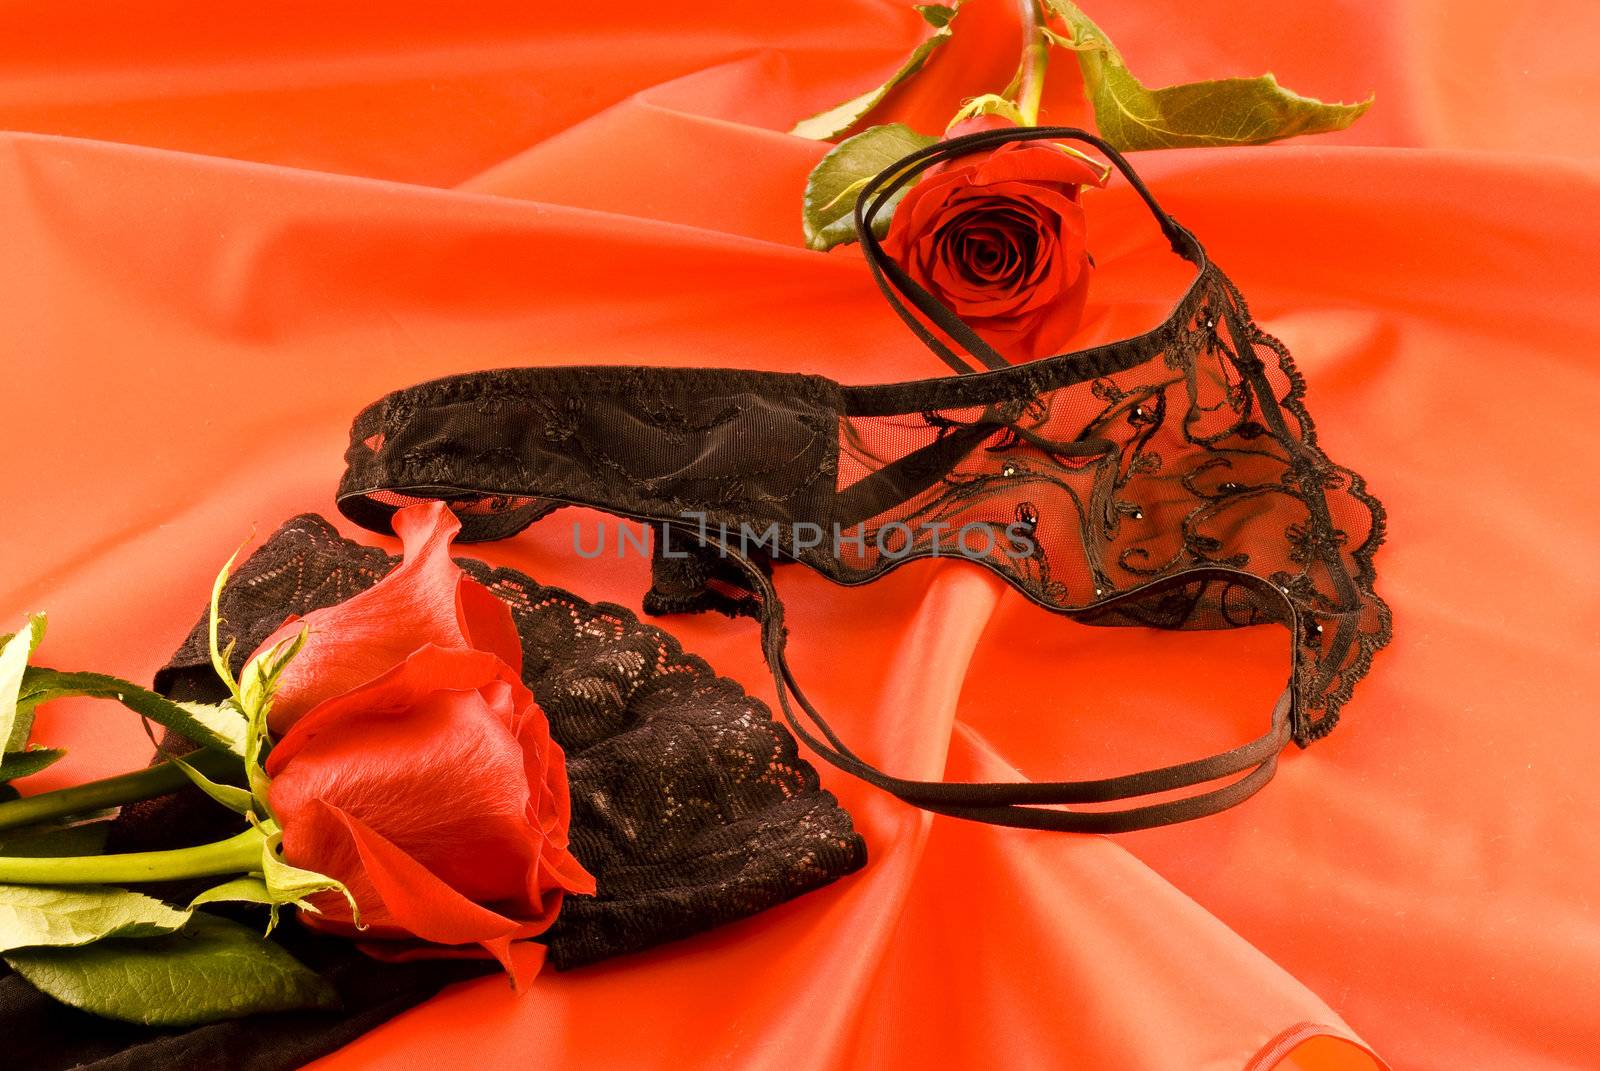 Black lingerie and red roses by caldix